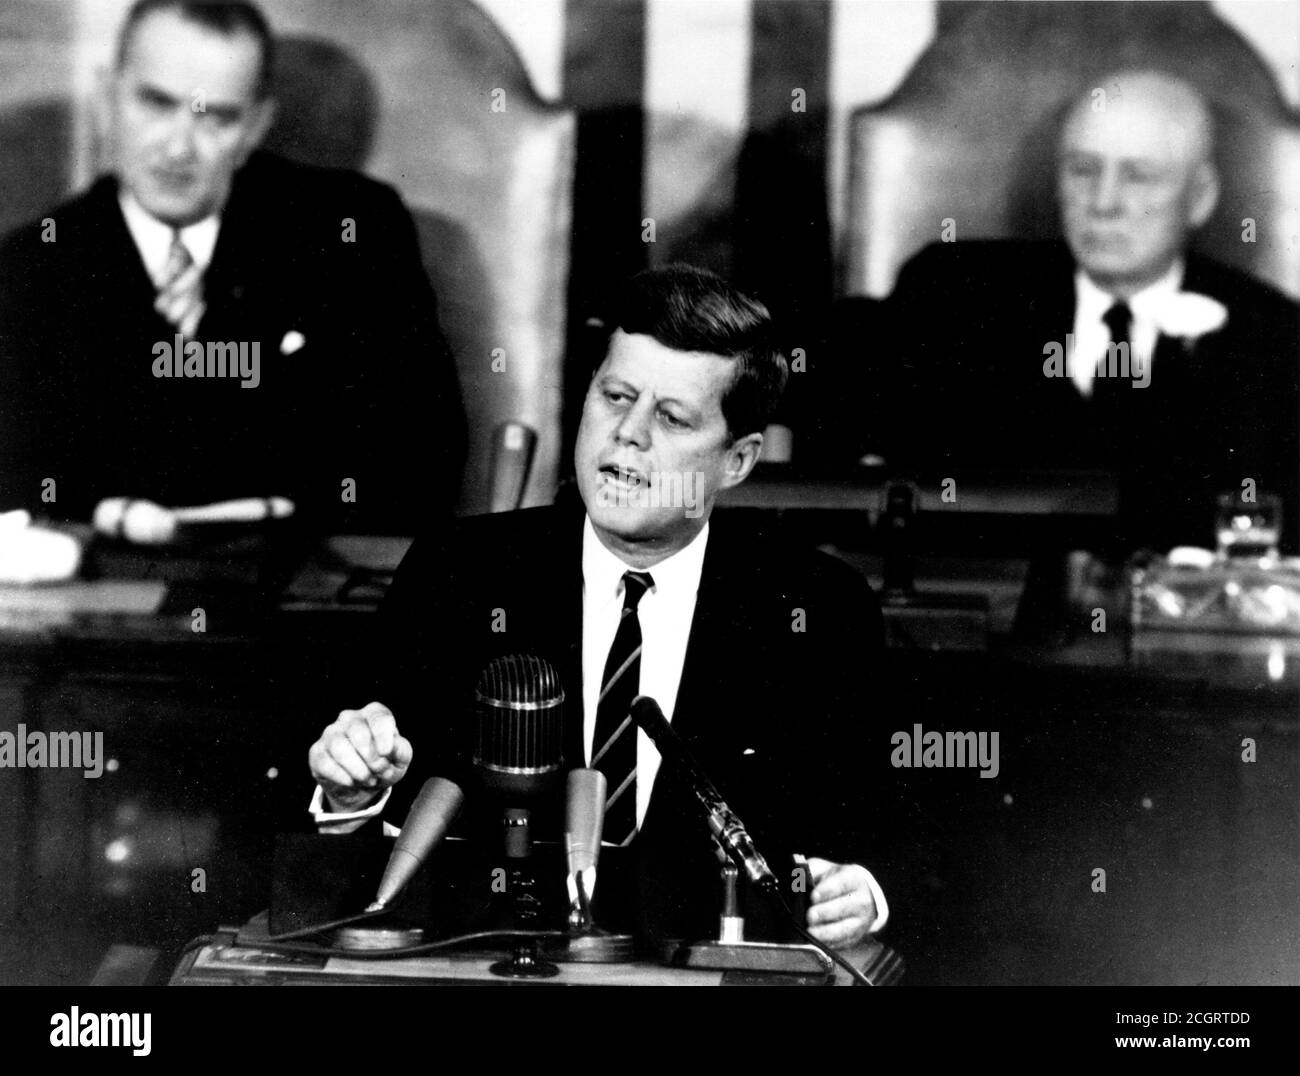 President John F. Kennedy in his historic message to a joint session of the Congress, on May 25, 1961 declared, '...I believe this nation should commit itself to achieving the goal, before this decade is out, of landing a man on the Moon and returning him safely to the Earth.' This goal was achieved when astronaut Neil A. Armstrong became the first human to set foot upon the Moon at 10:56 p.m. EDT, July 20, 1969. Shown in the background are, (left) Vice President Lyndon Johnson, and (right) Speaker of the House Sam T. Rayburn. Stock Photo